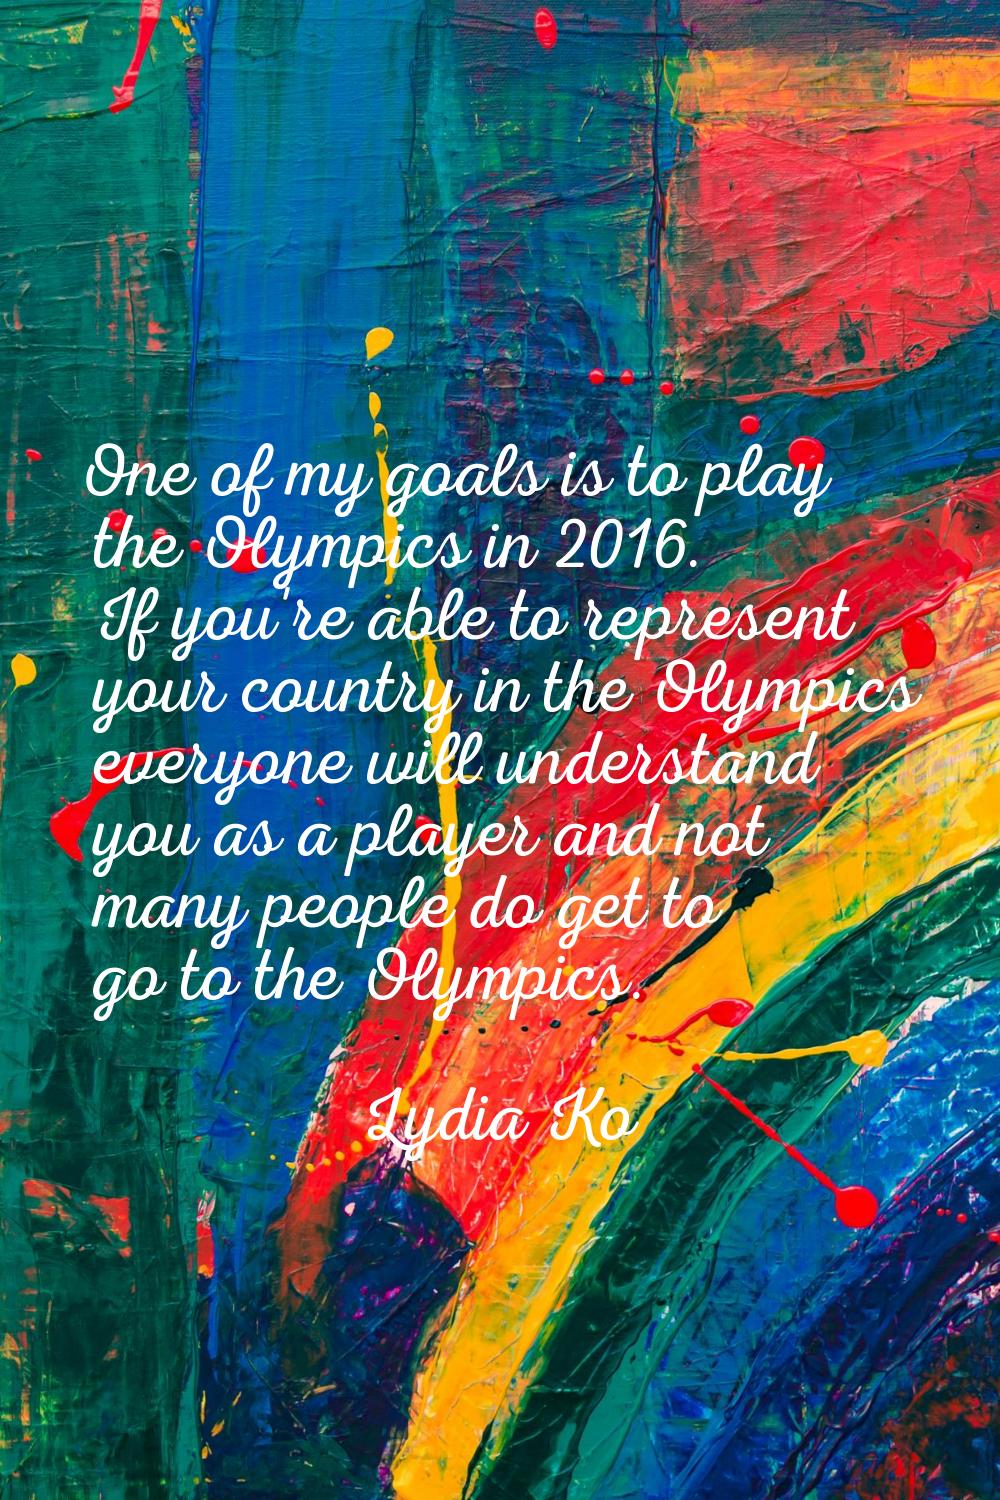 One of my goals is to play the Olympics in 2016. If you're able to represent your country in the Ol